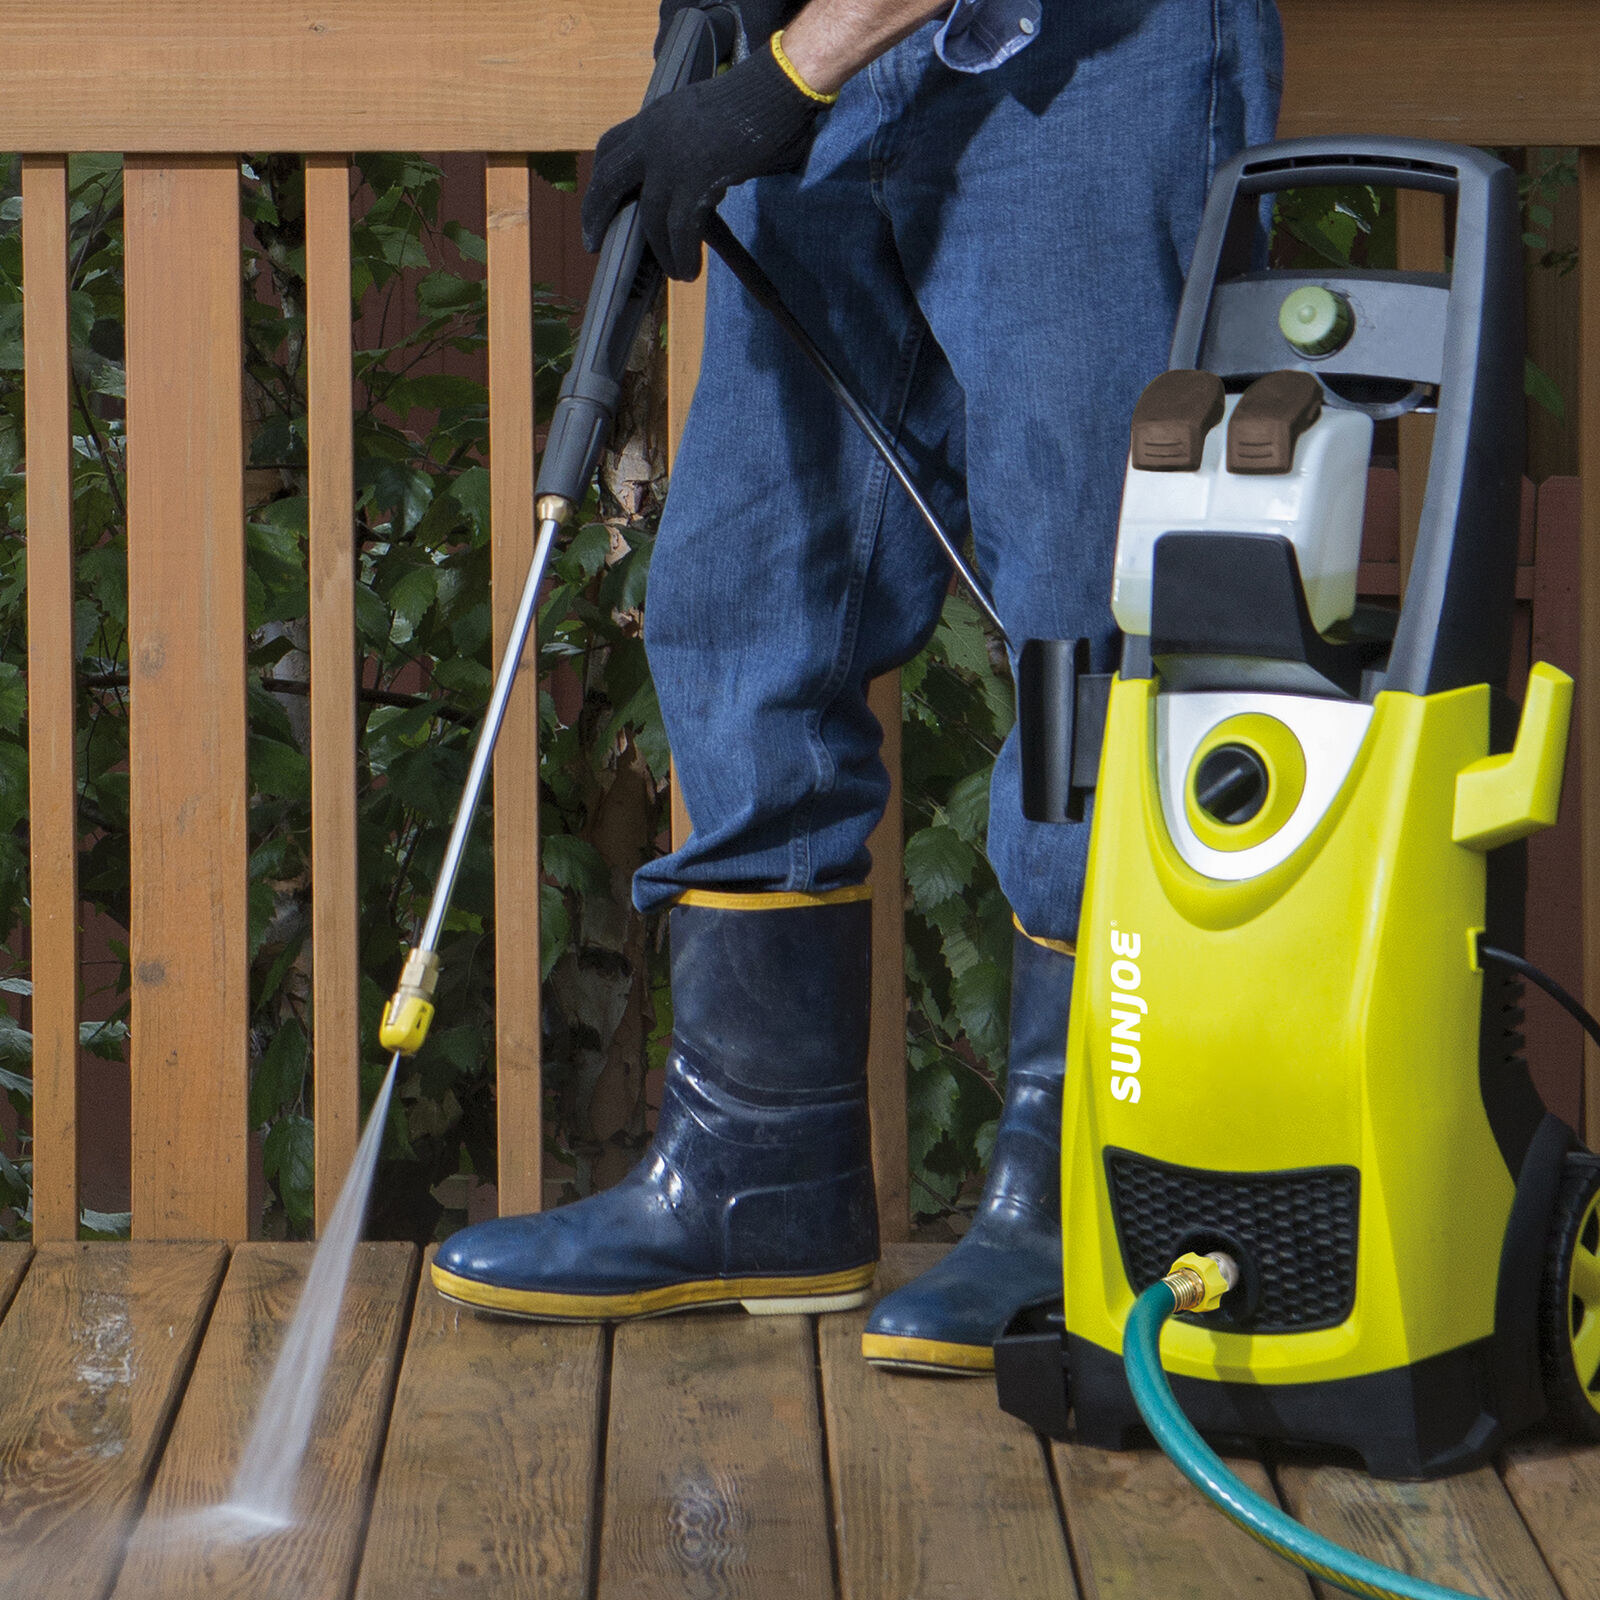 Man with pressure washer on patio